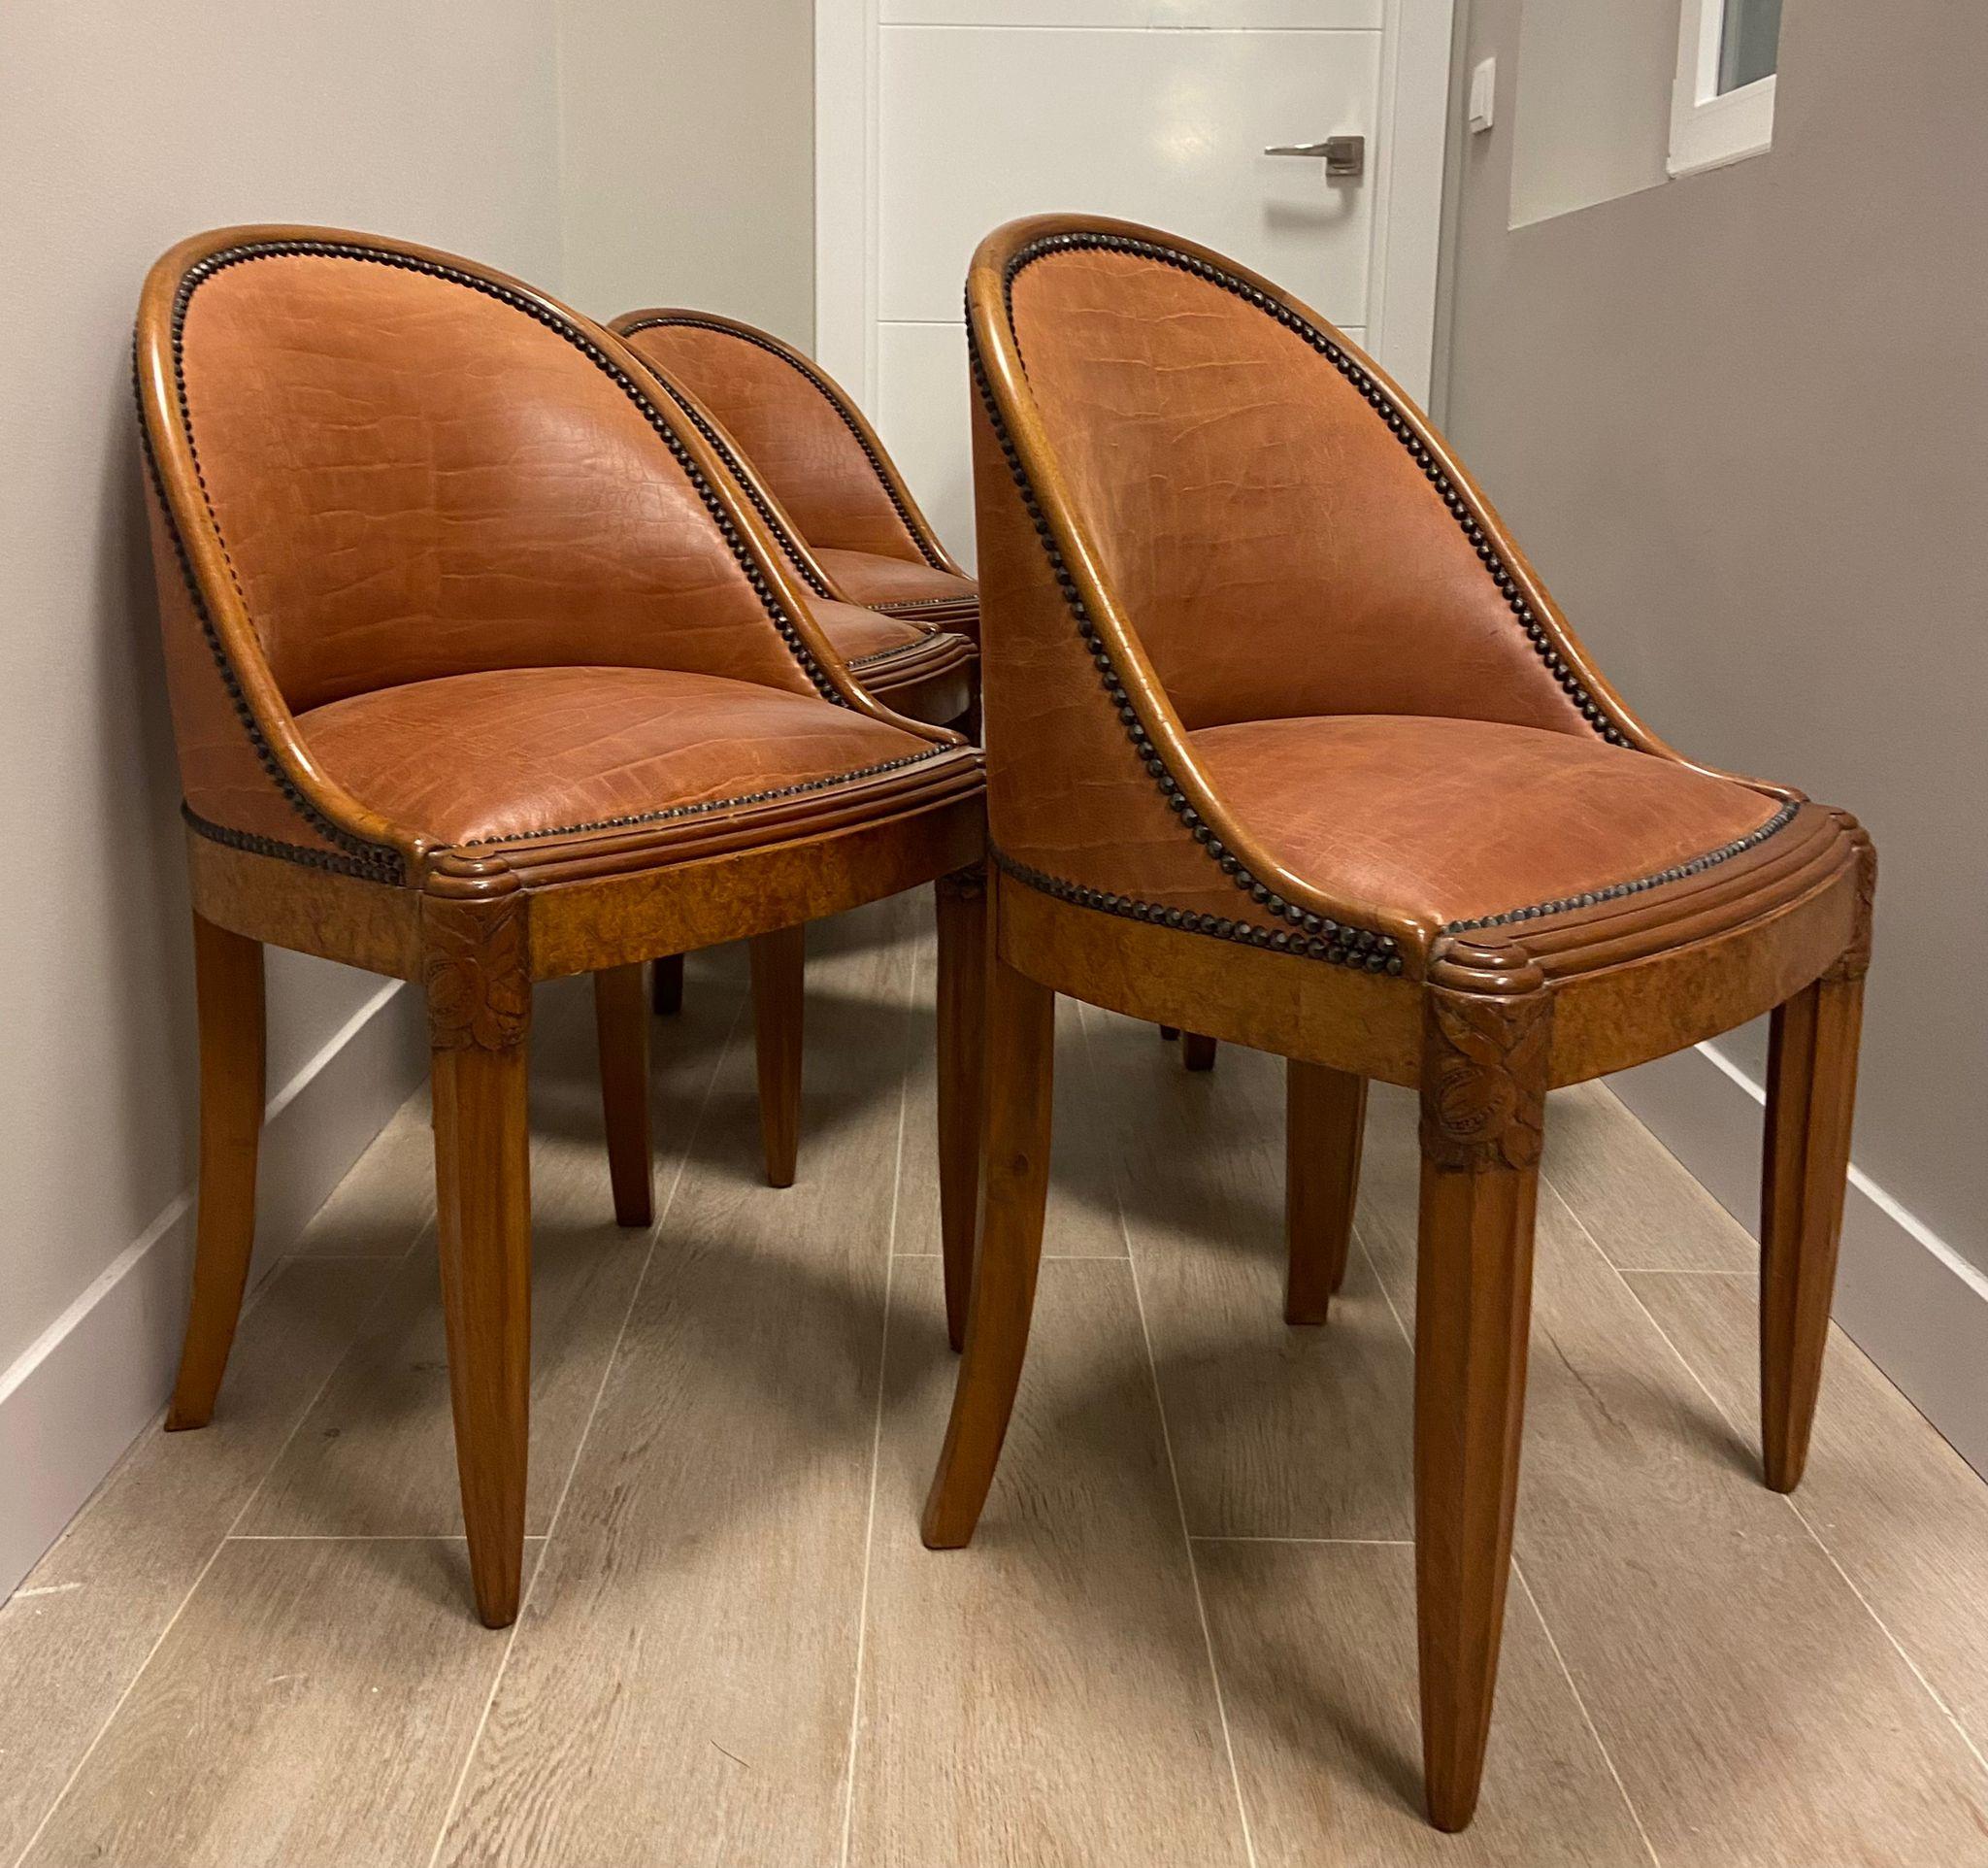 Outstanding set of 6 Art Deco armchairs, made by the French firm Mercier Frères, around the 1940s. There are a total of six chairs made of birch root, decorated with fleshy elements in two of its corners. They have been recently reupholstered, with